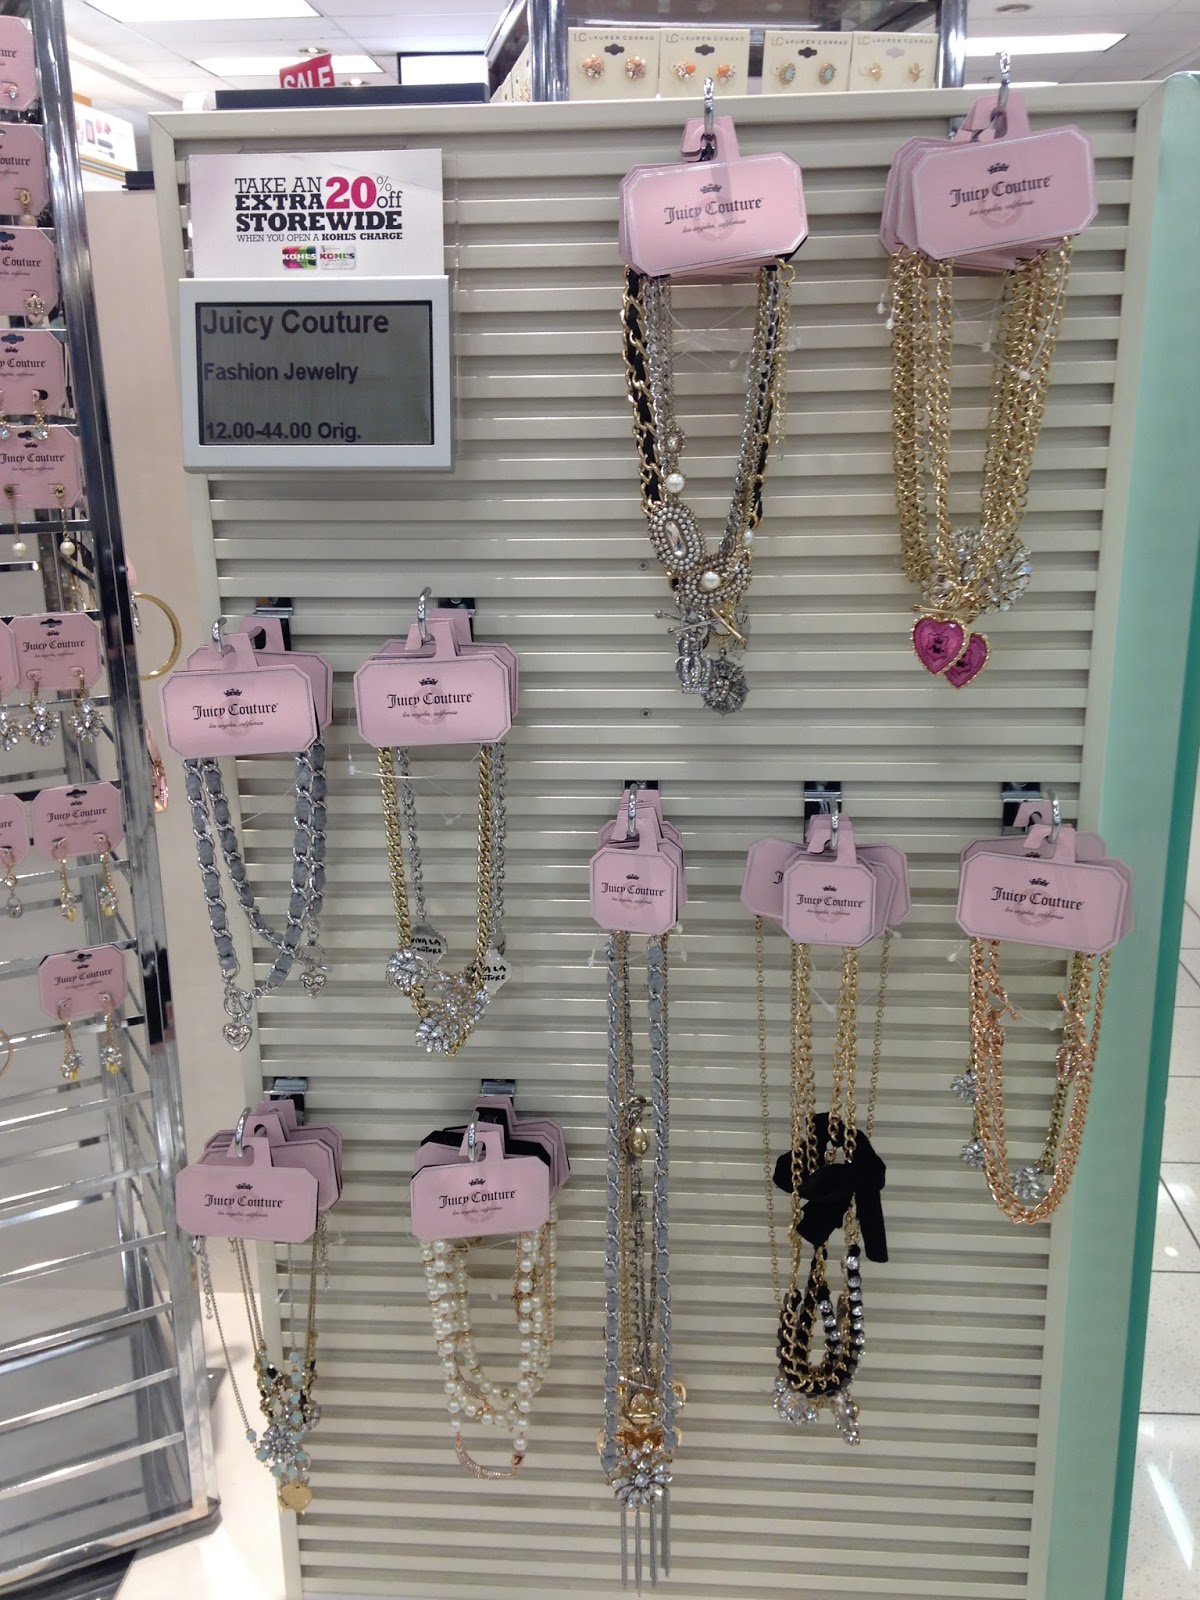 Tracy's Notebook of Style: Juicy Couture at Kohls - Store pics + My 5 ...